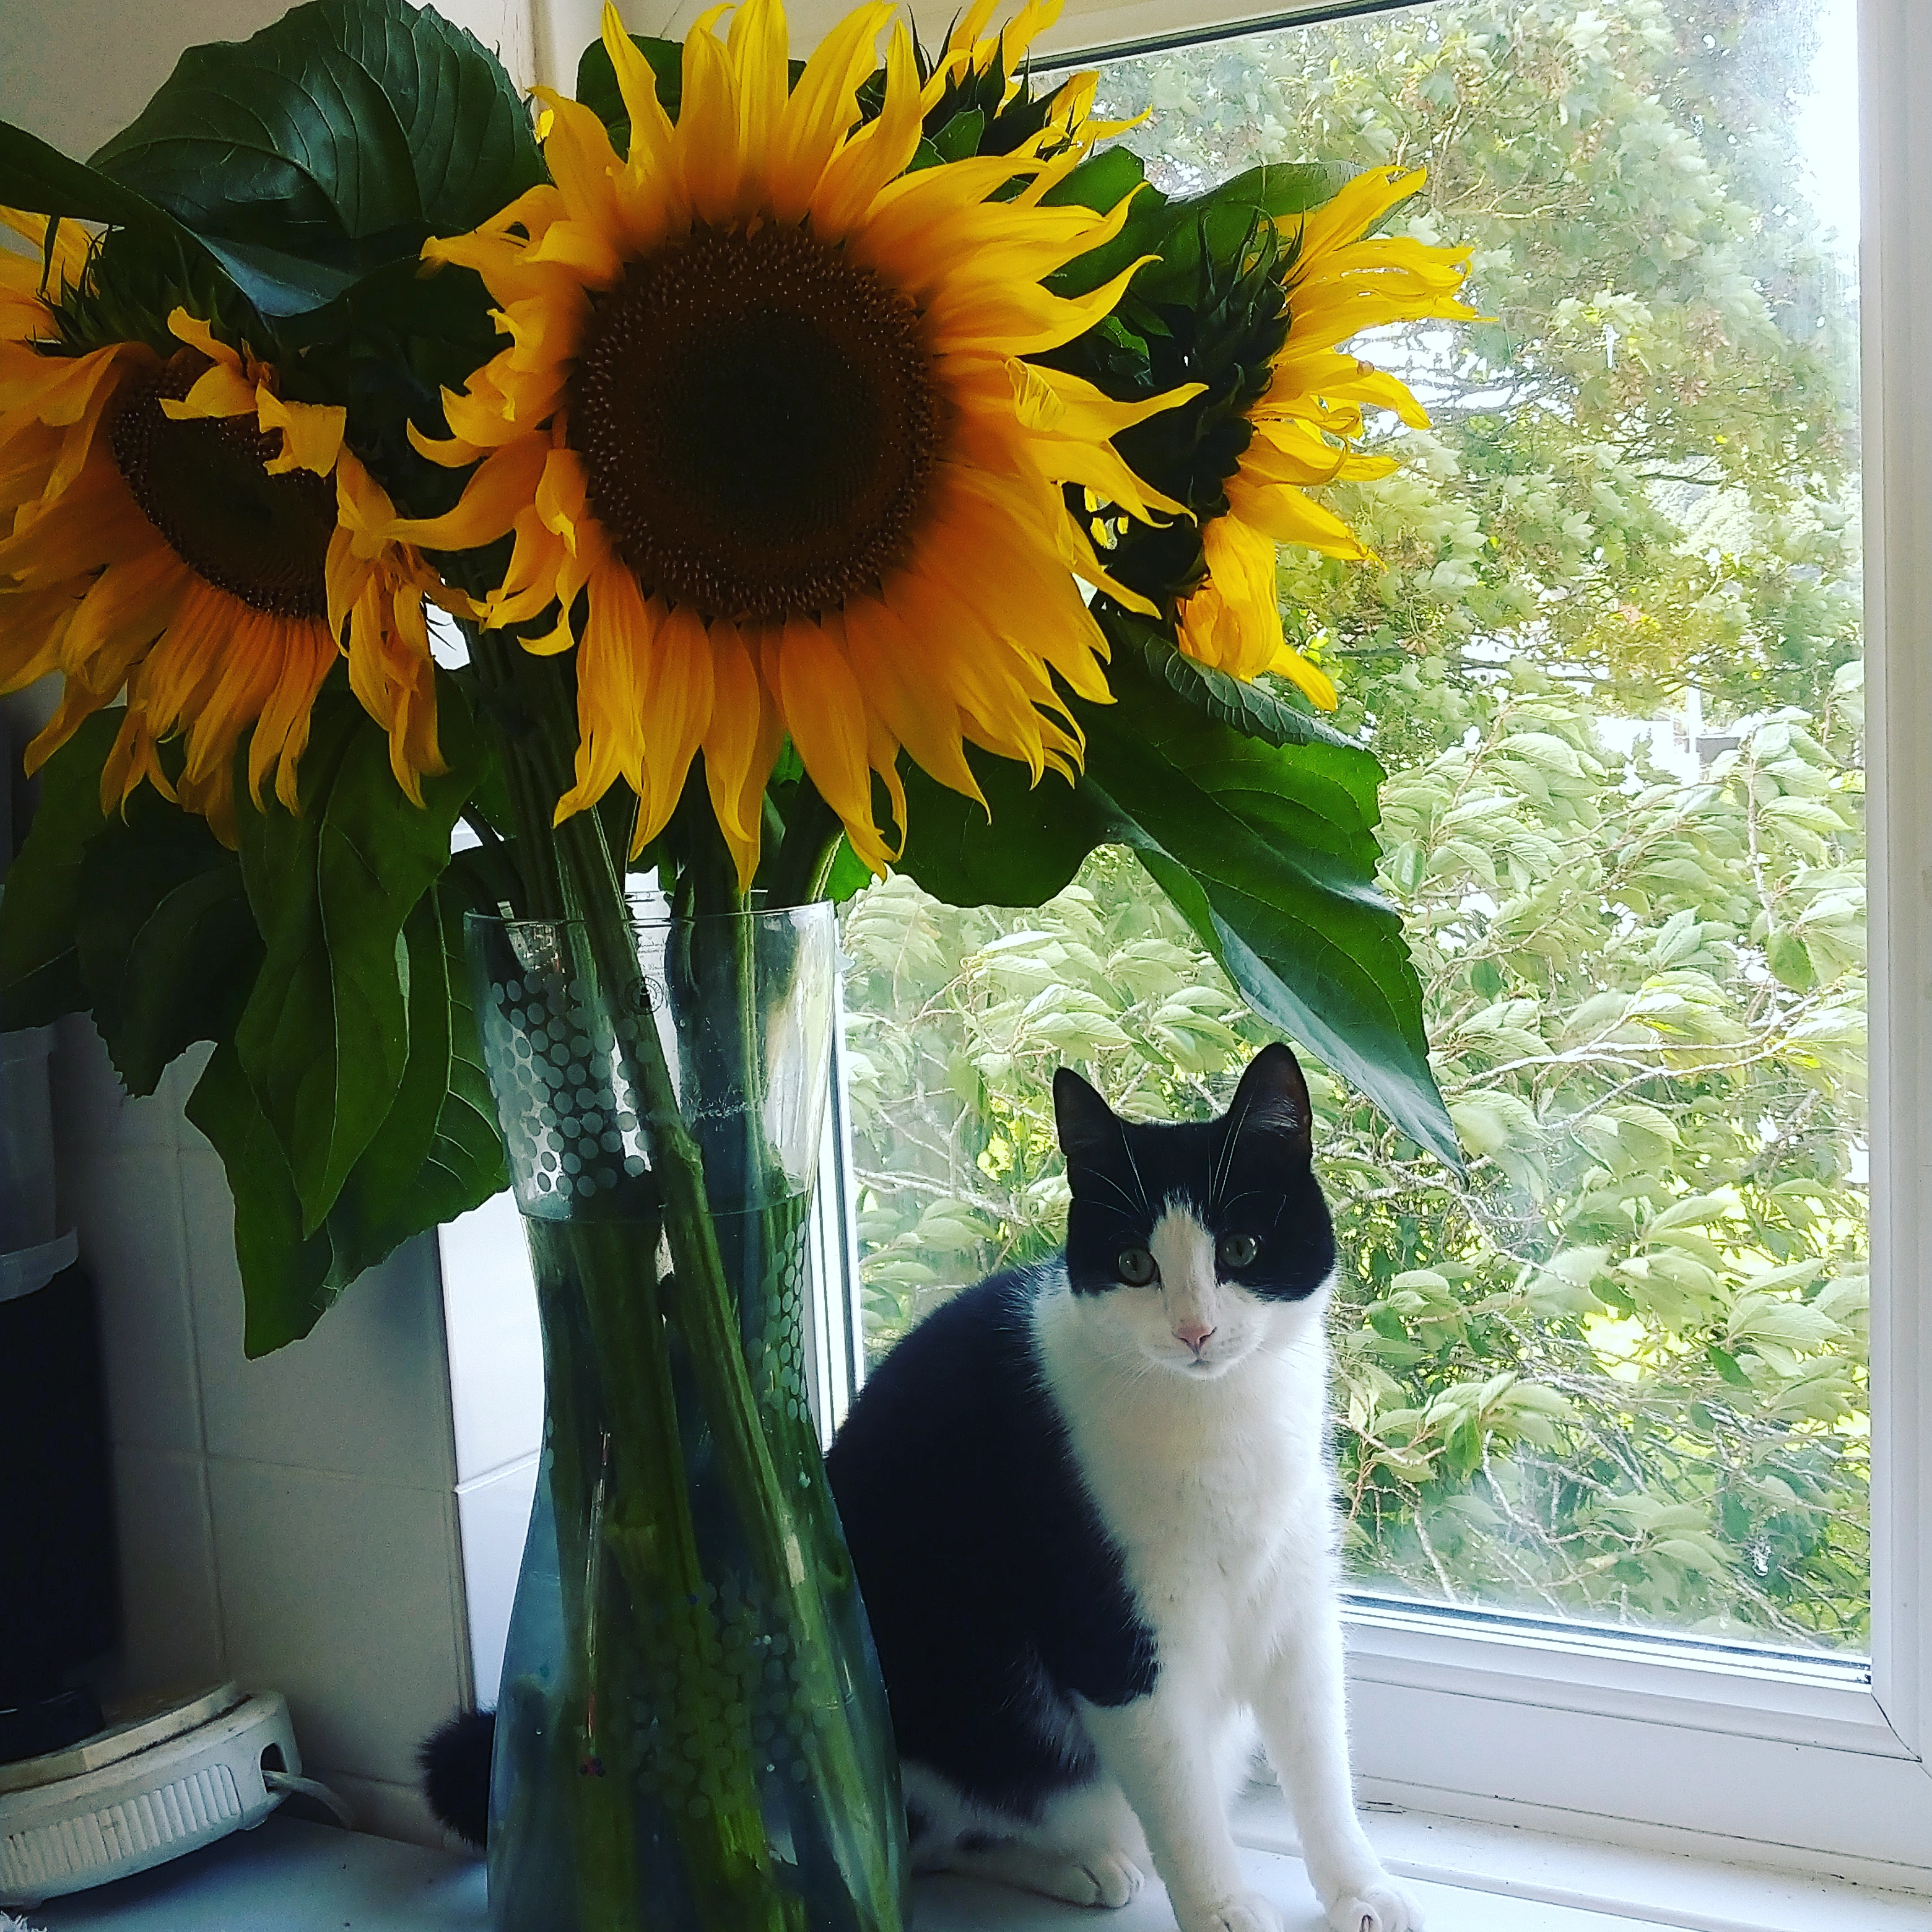 Flower, Cat, Plant, Photograph, Green, Botany, Leaf, Flowerpot, Yellow, Petal, Carnivore, Felidae, Window, Whiskers, Sunflower, Annual Plant, Flowering Plant, Tail, Grass, Domestic Short-haired Cat